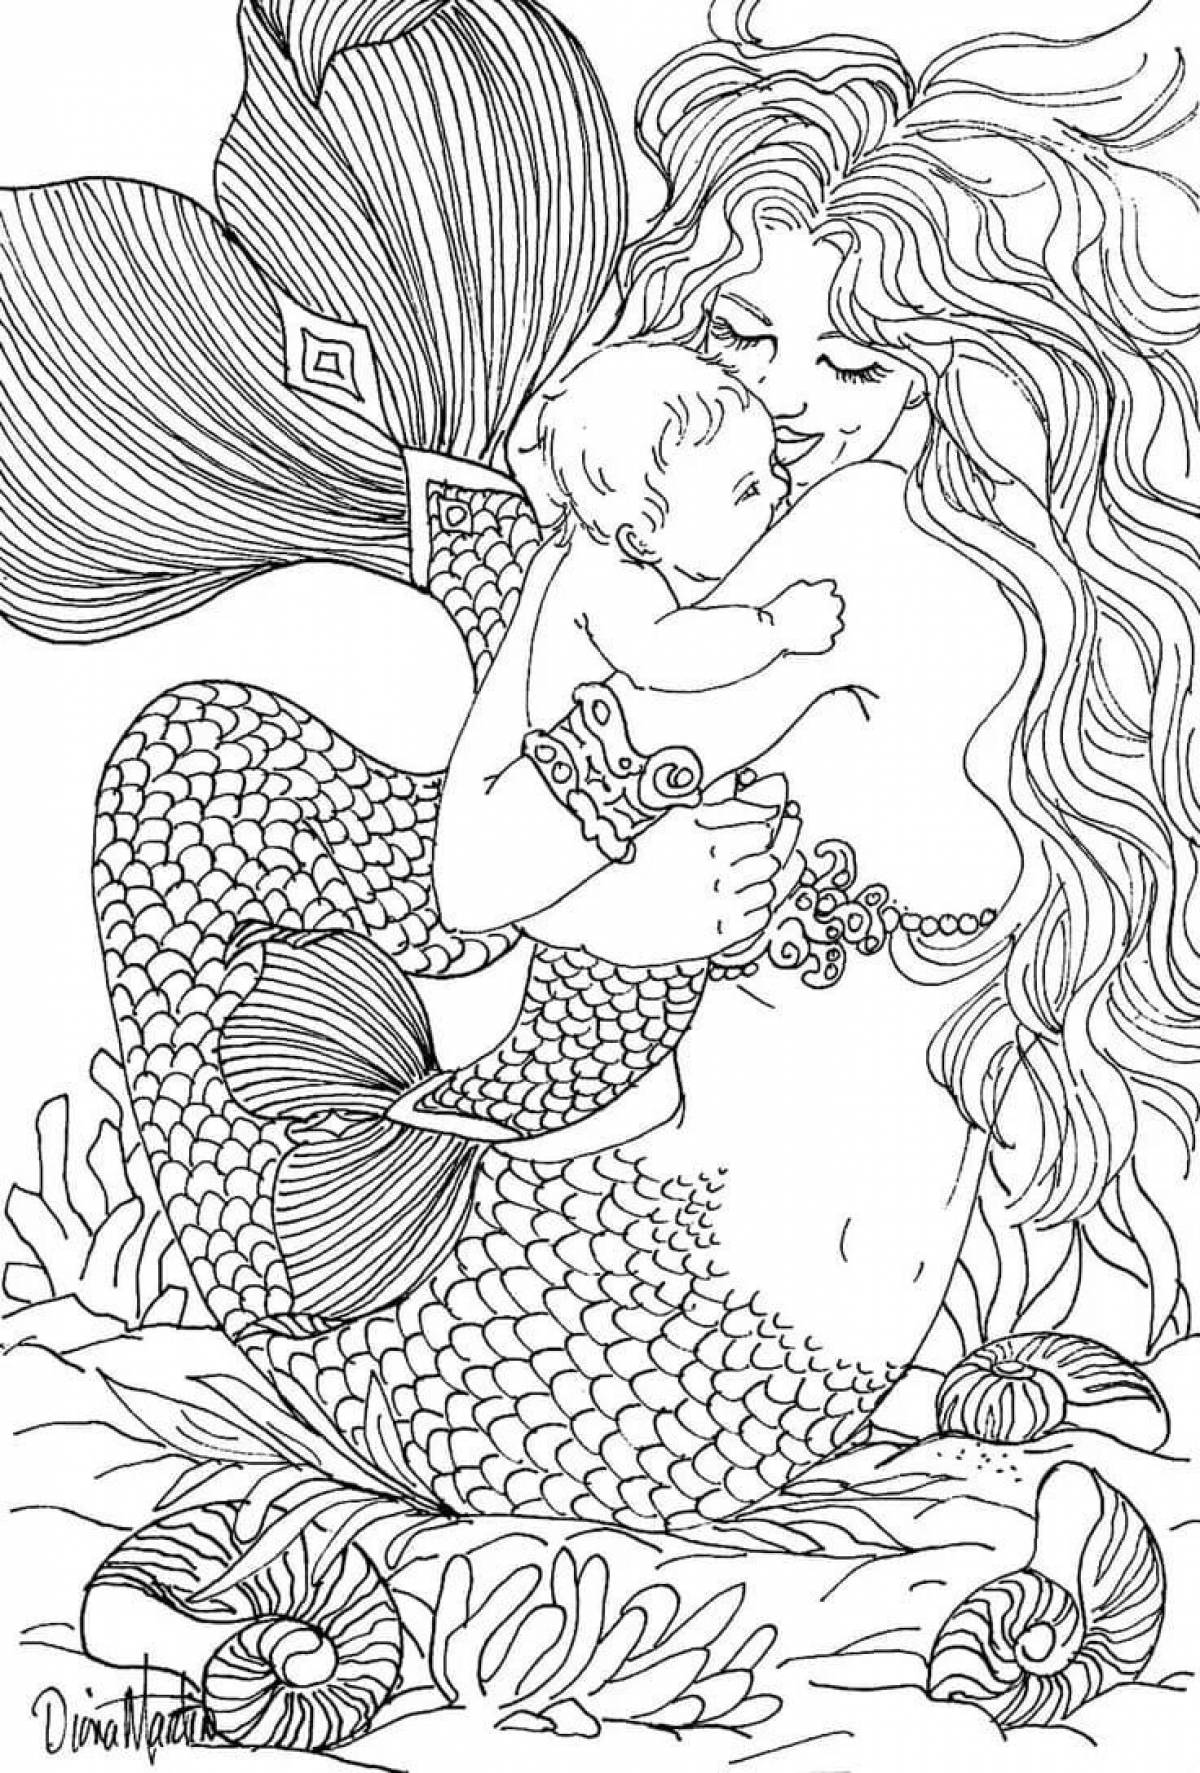 Luminous adult coloring page